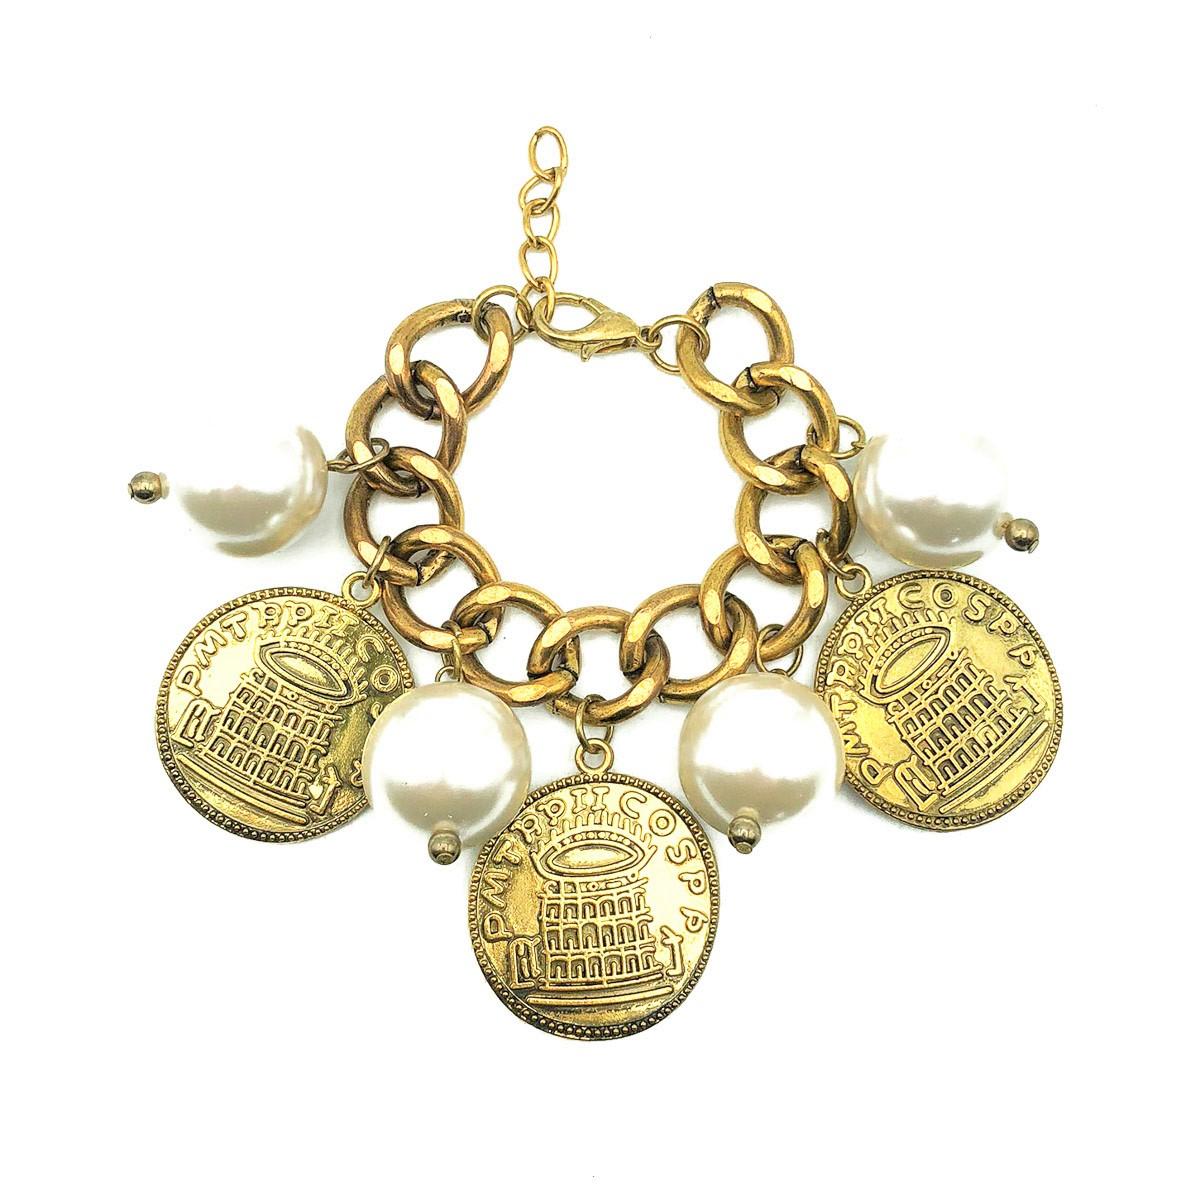 A beyond dramatic Pearl Coin Charm Bracelet. Crafted in gold tone metal with bronze overtones and resin simulated pearls. Very good pre-owned condition with minor patination on the curb links; the pearls and coins in immaculate condition, adjustable